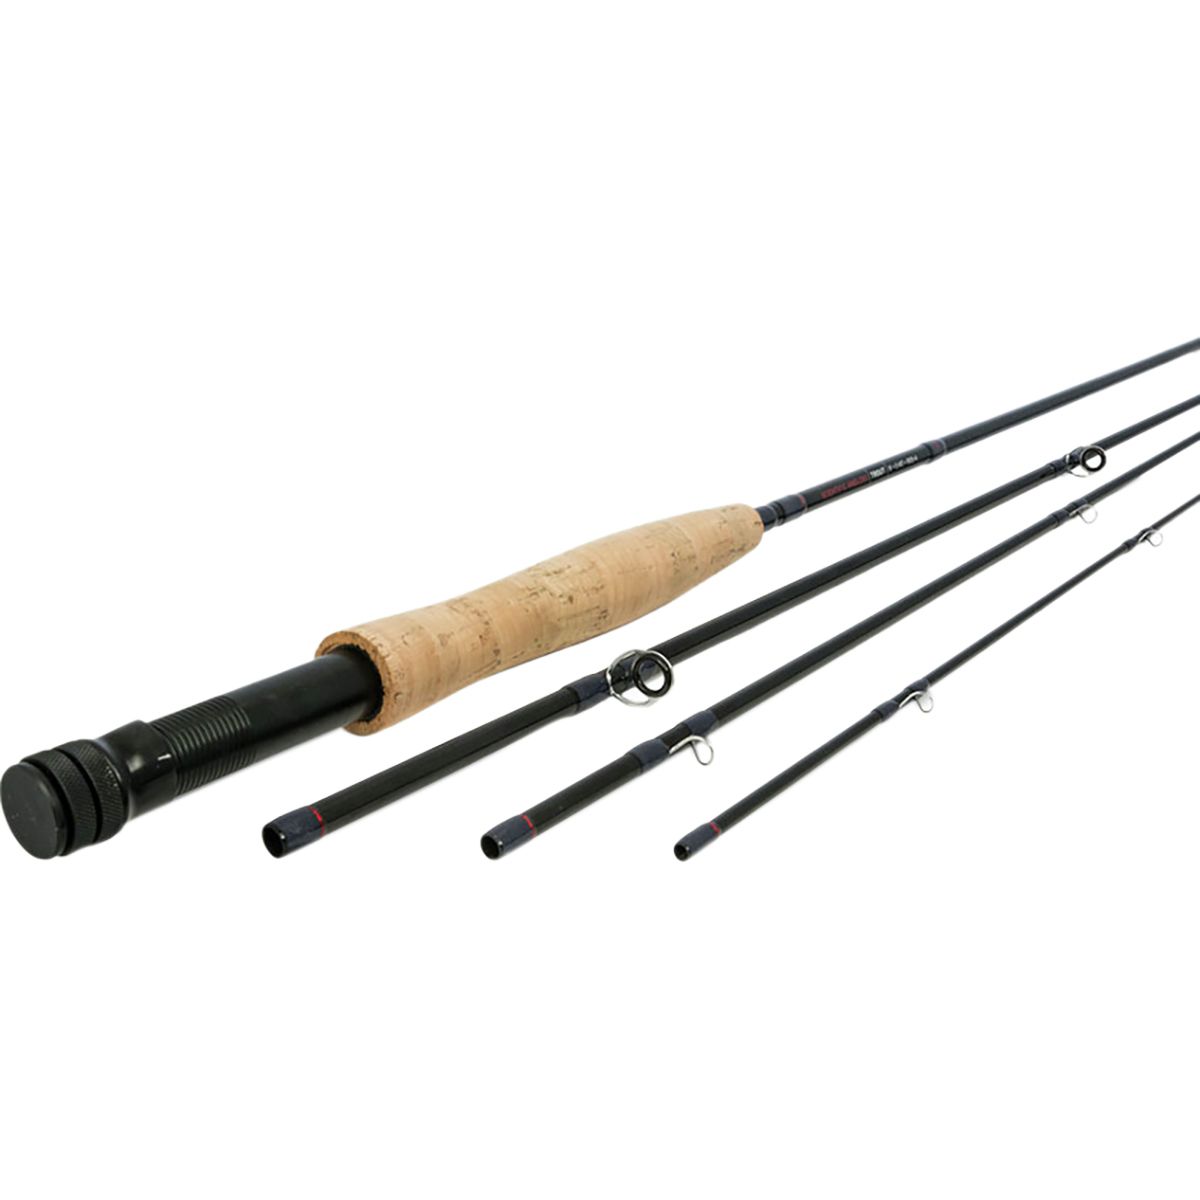 Scientific Anglers System 4, Rod Photos